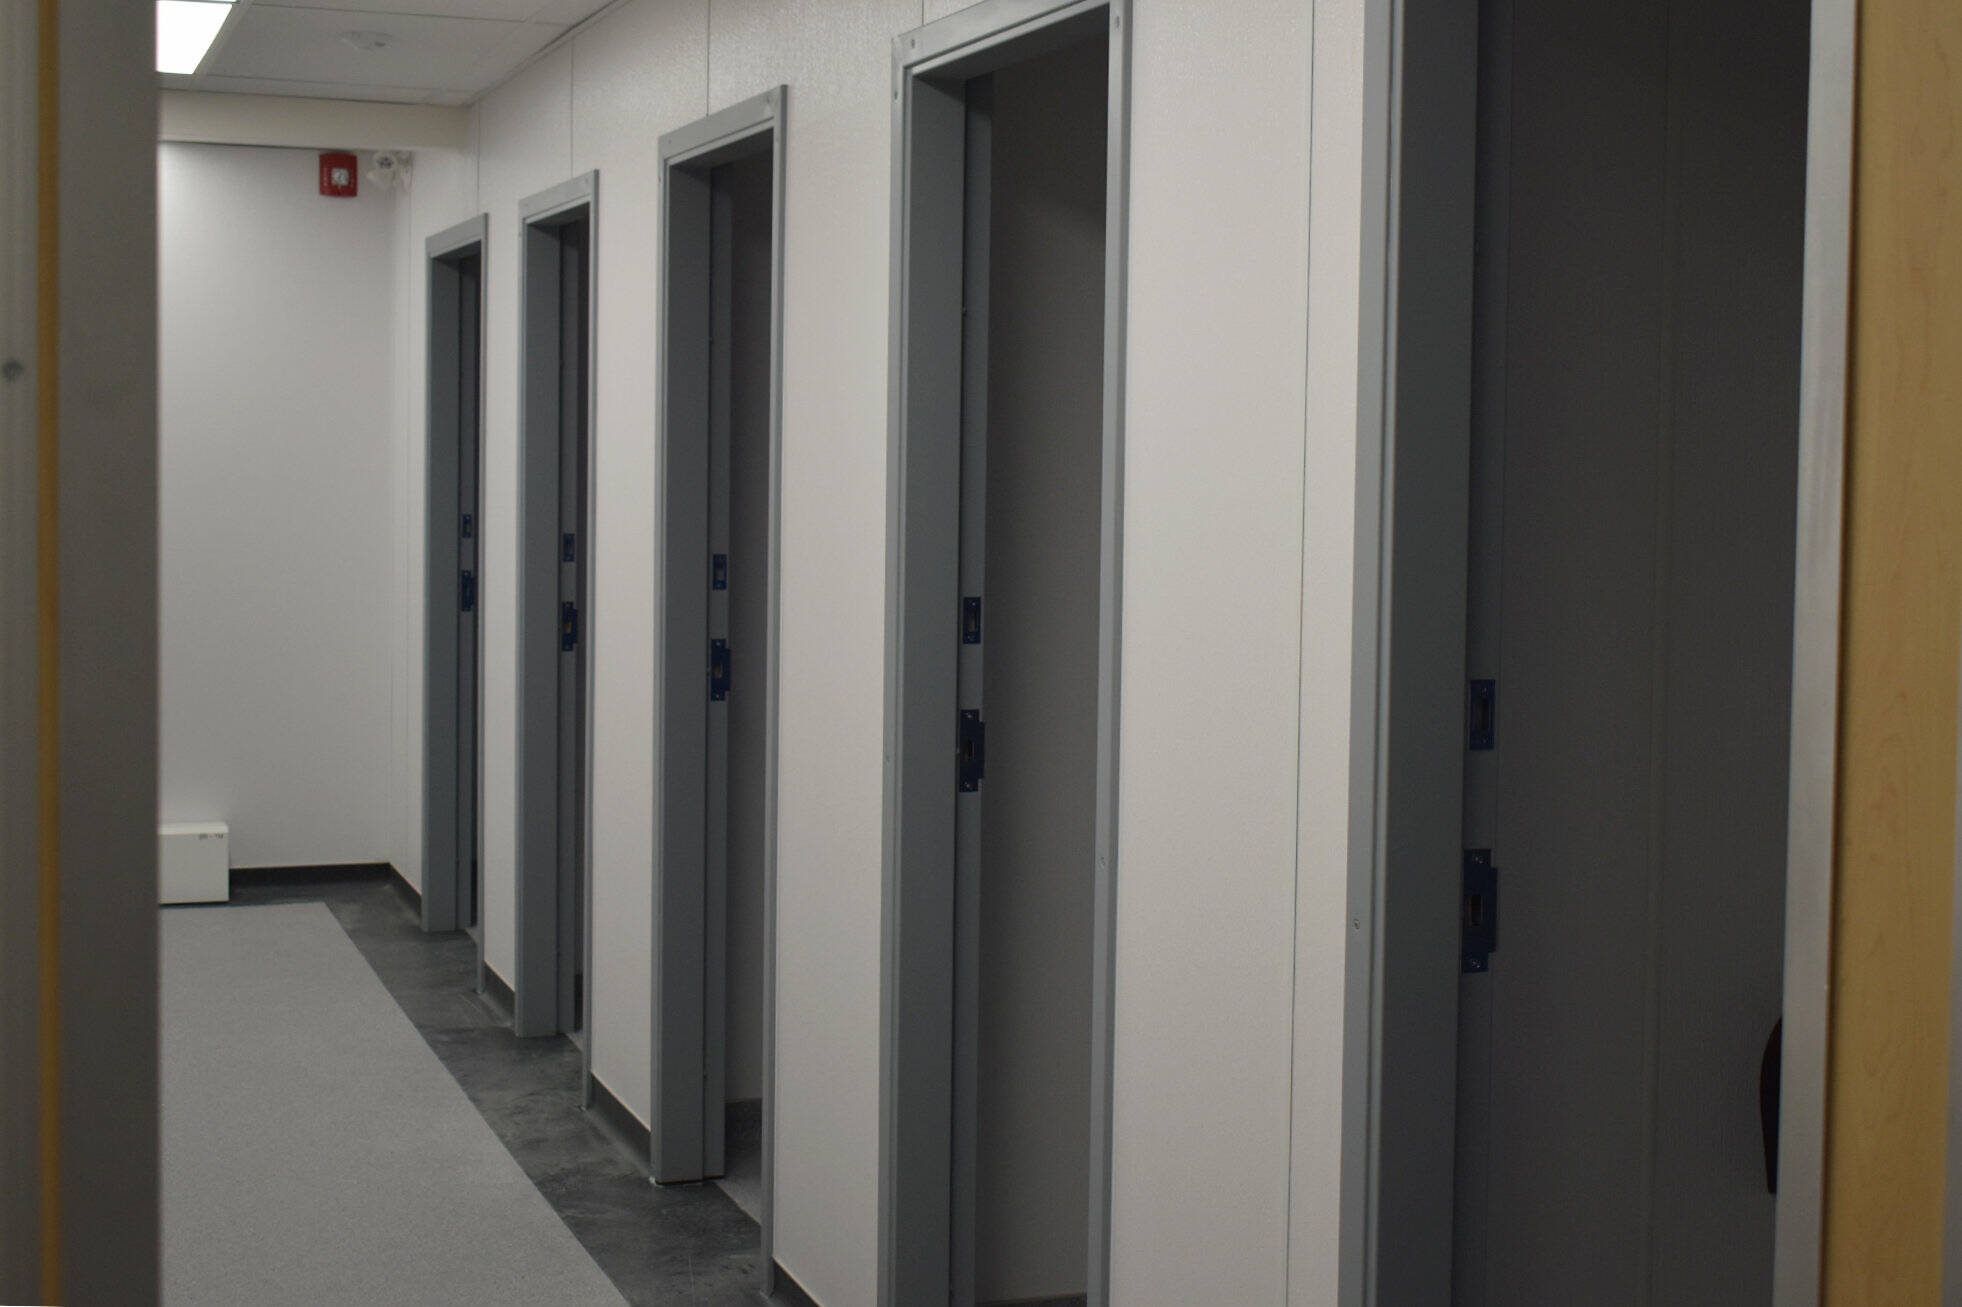 Gender neutral washrooms were installed at Eagle River Secondary over the summer to provide options for all students, after previous washrooms required extensive repairs. (Andrea Horton-Eagle Valley News)